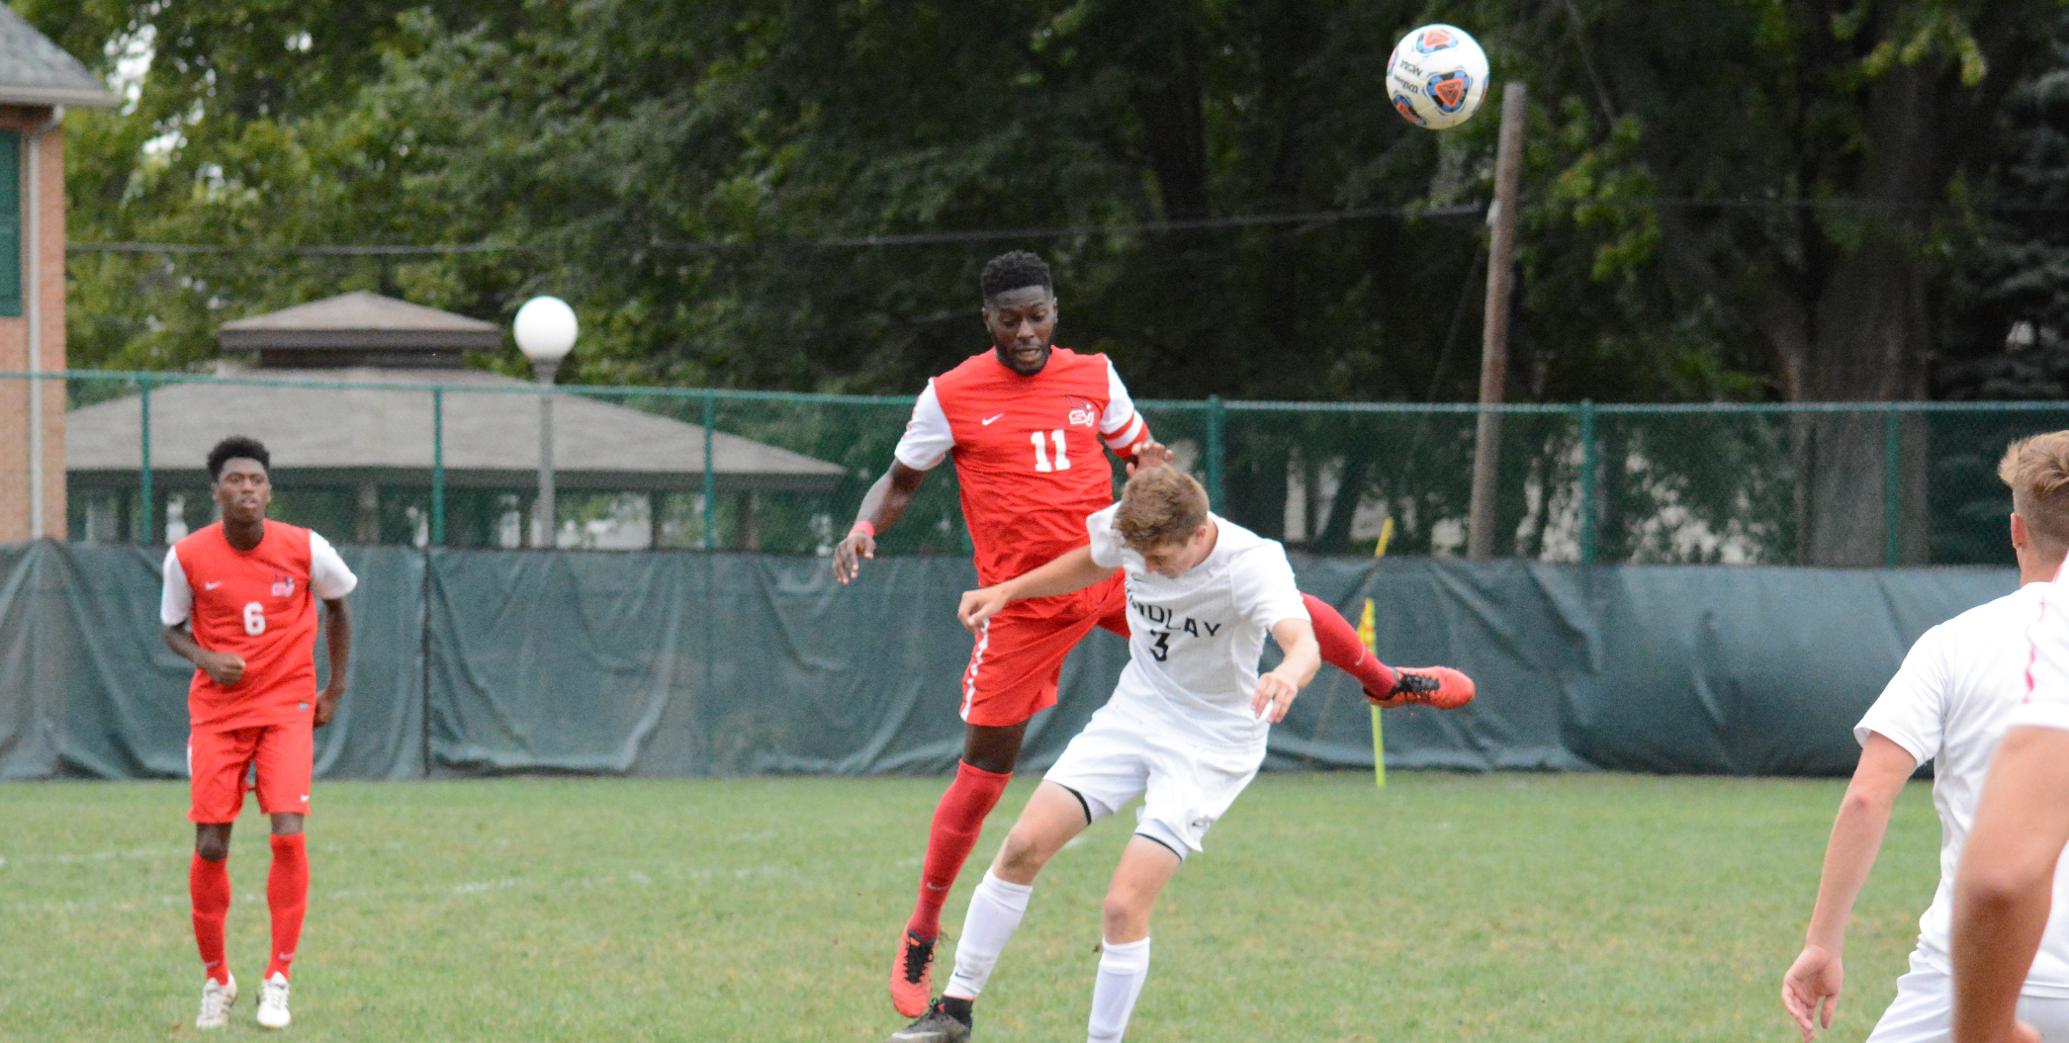 Men's Soccer drops overtime contest at Findlay, 3-2